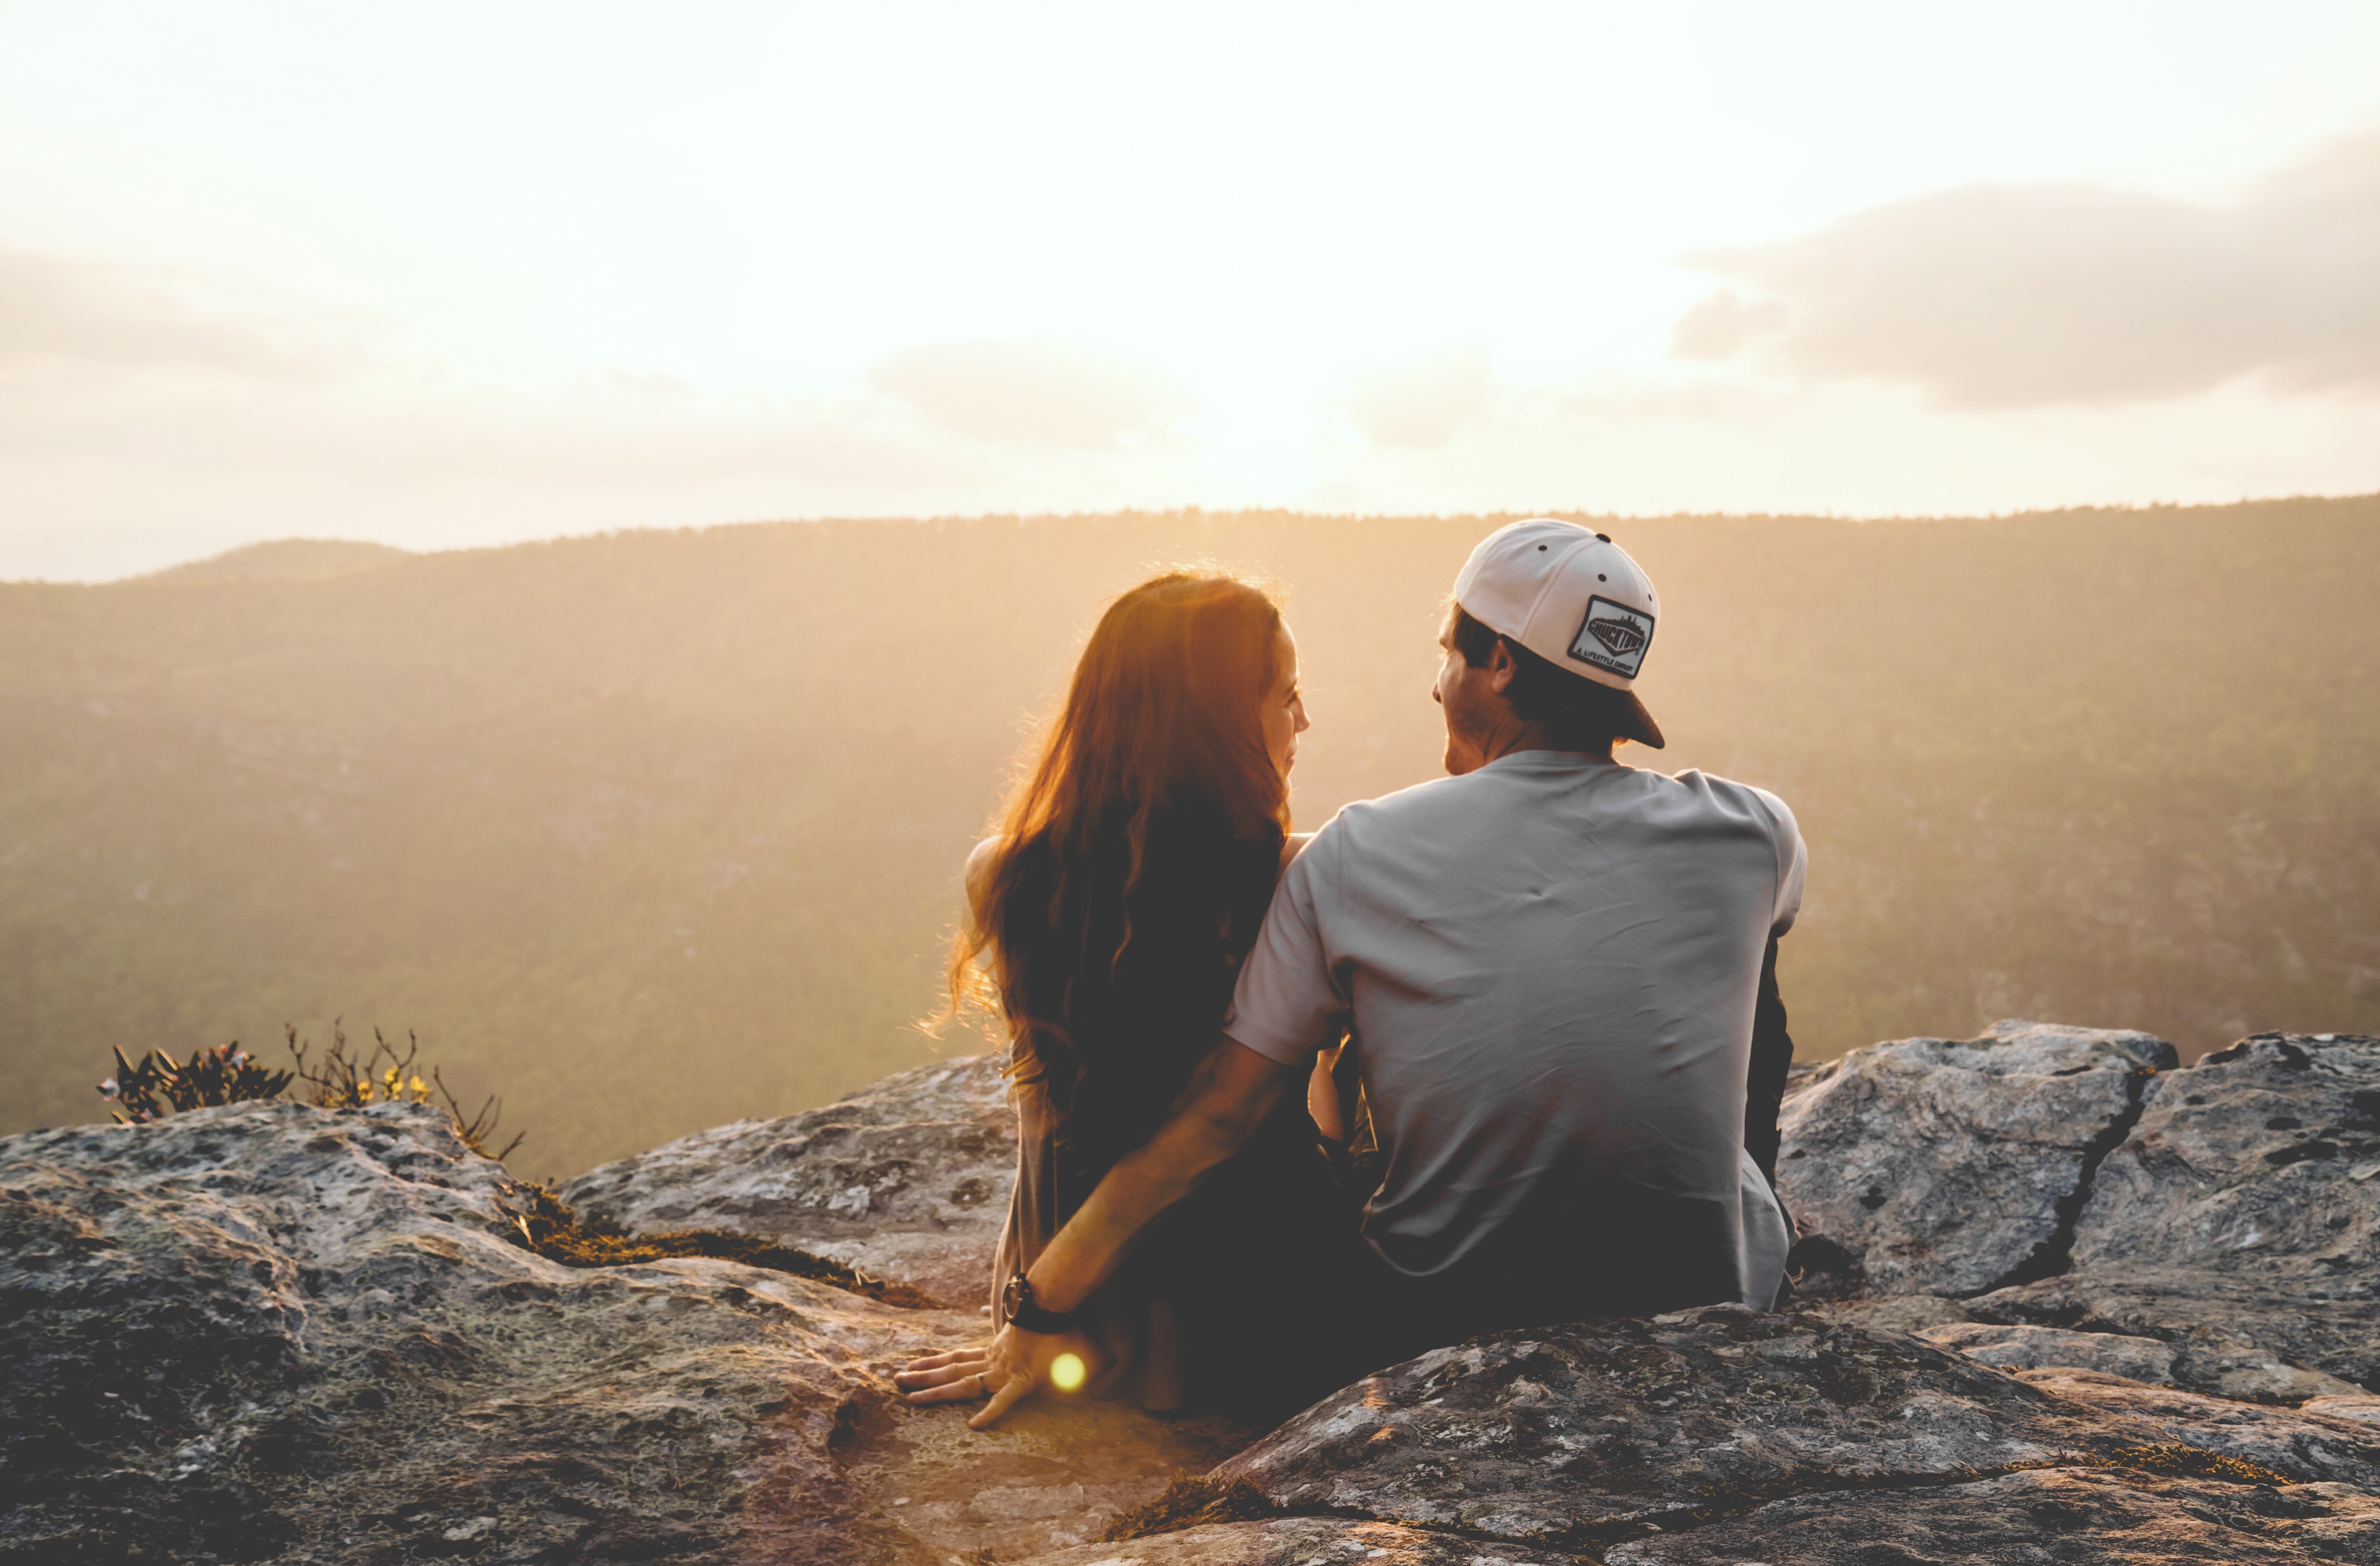 A couple sitting on a cliff together. | Source: Unsplash